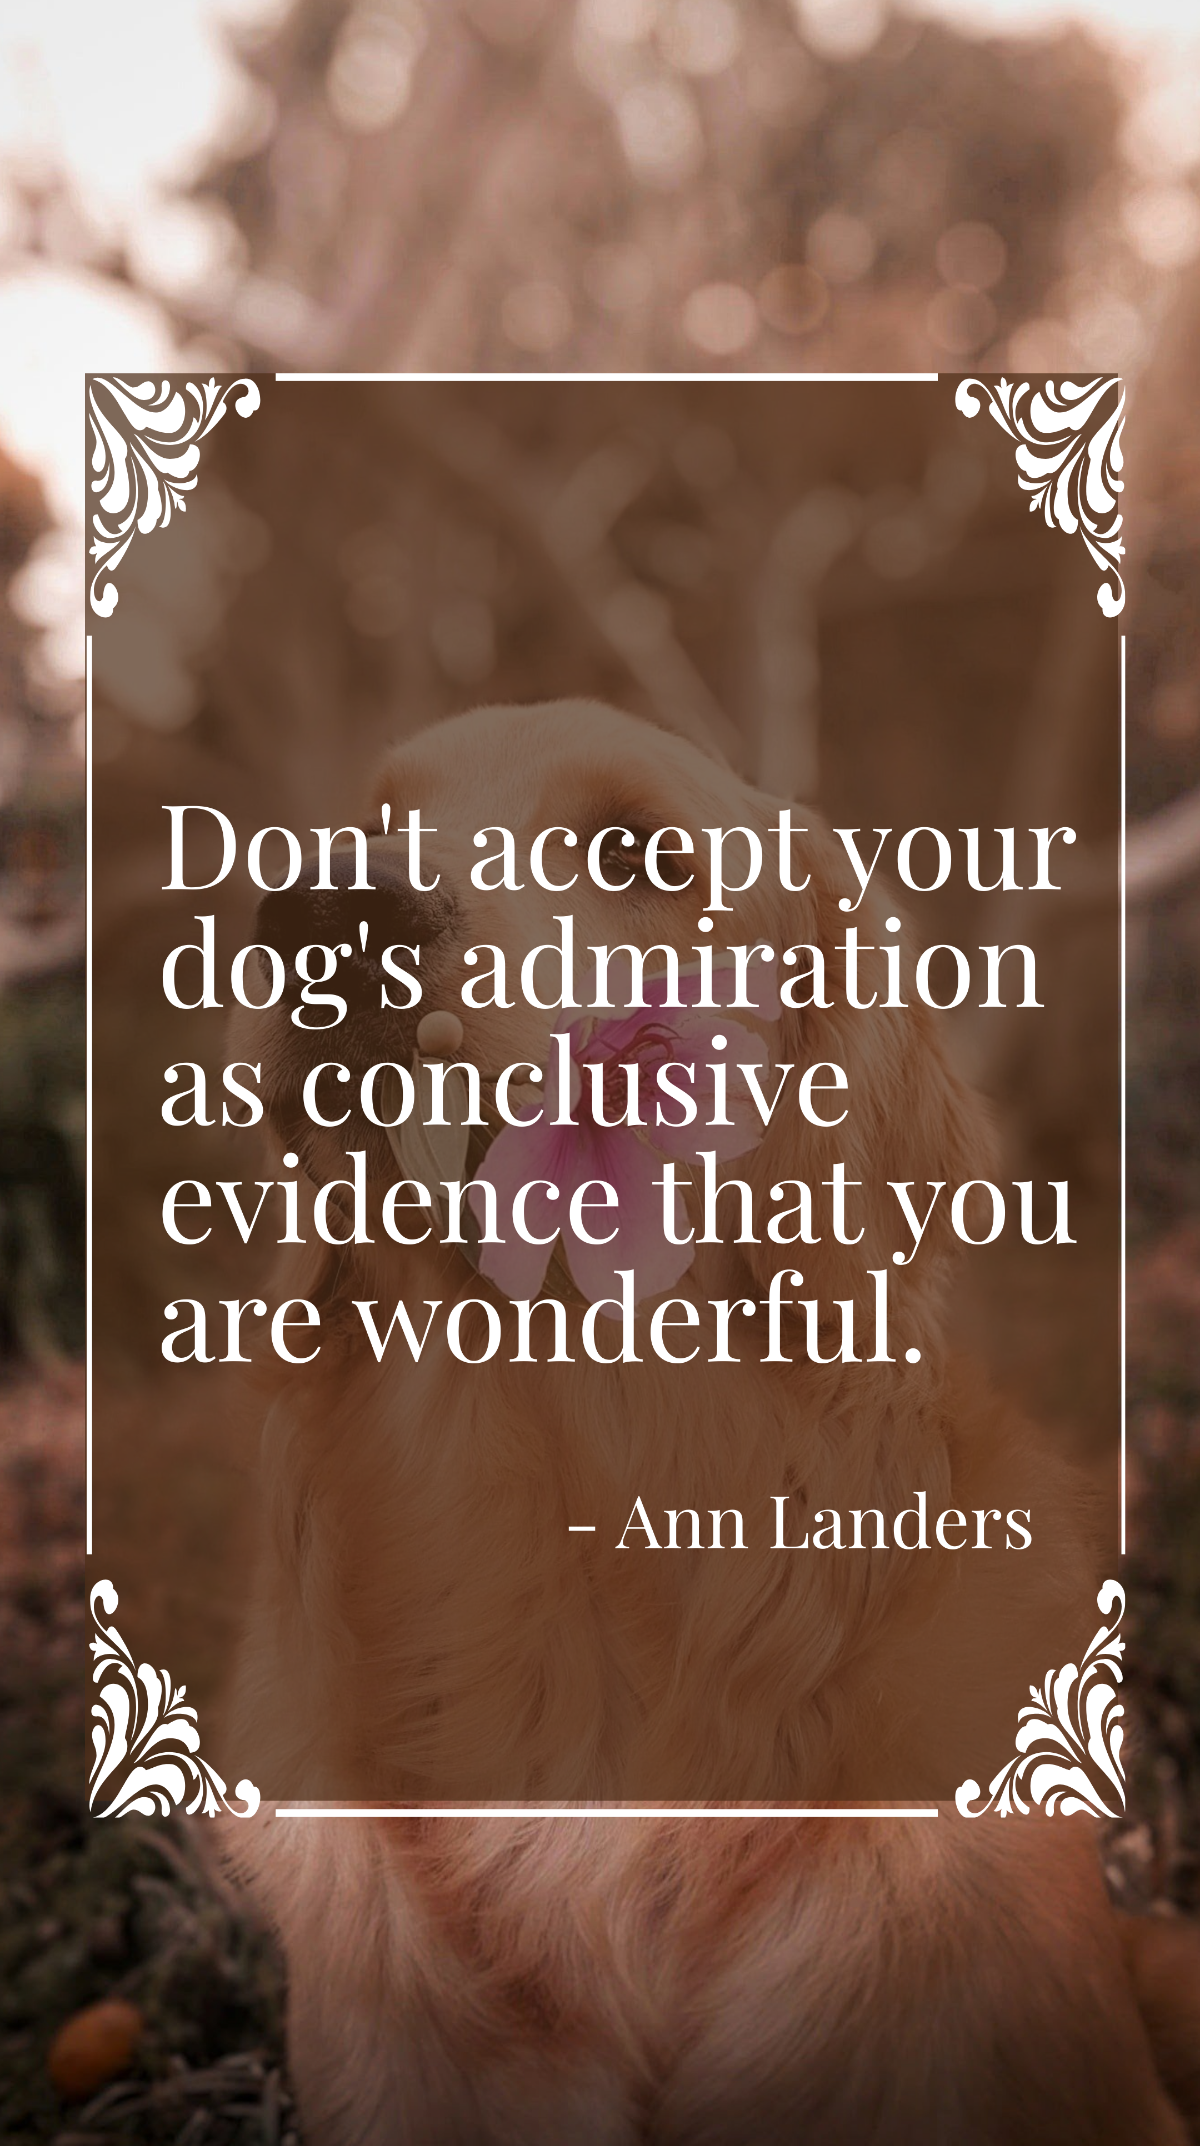 Ann Landers - Don't accept your dog's admiration as conclusive evidence that you are wonderful. Template